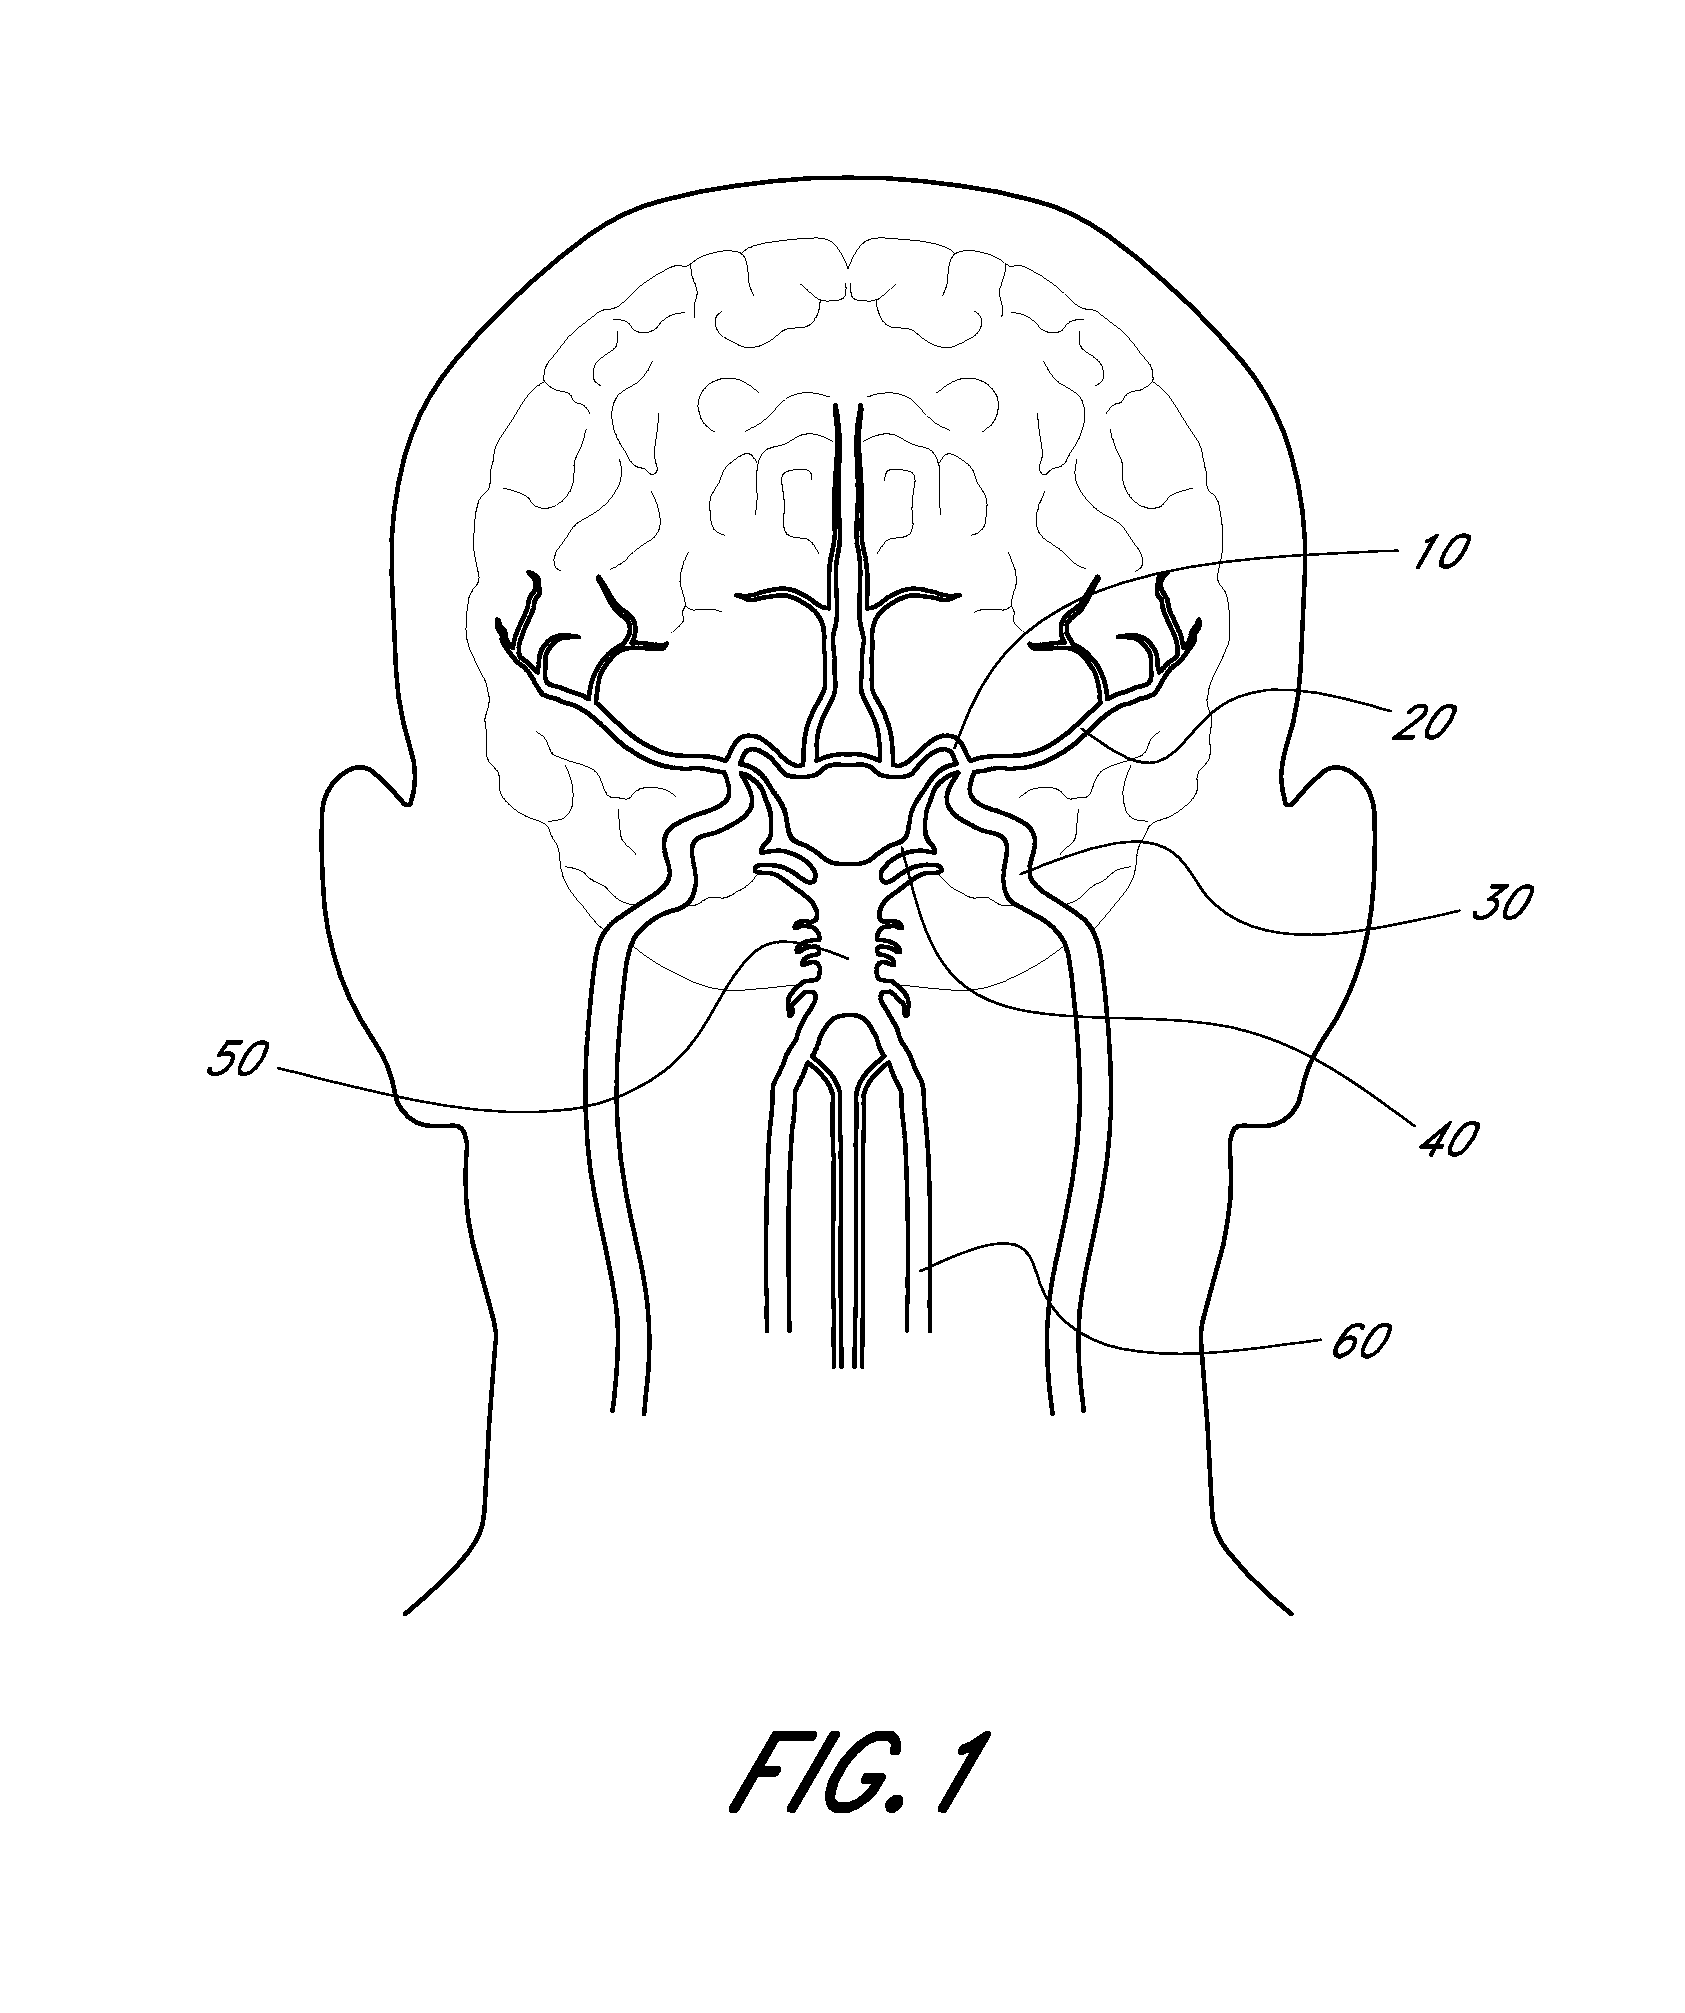 Method for providing progressive therapy for thrombus management